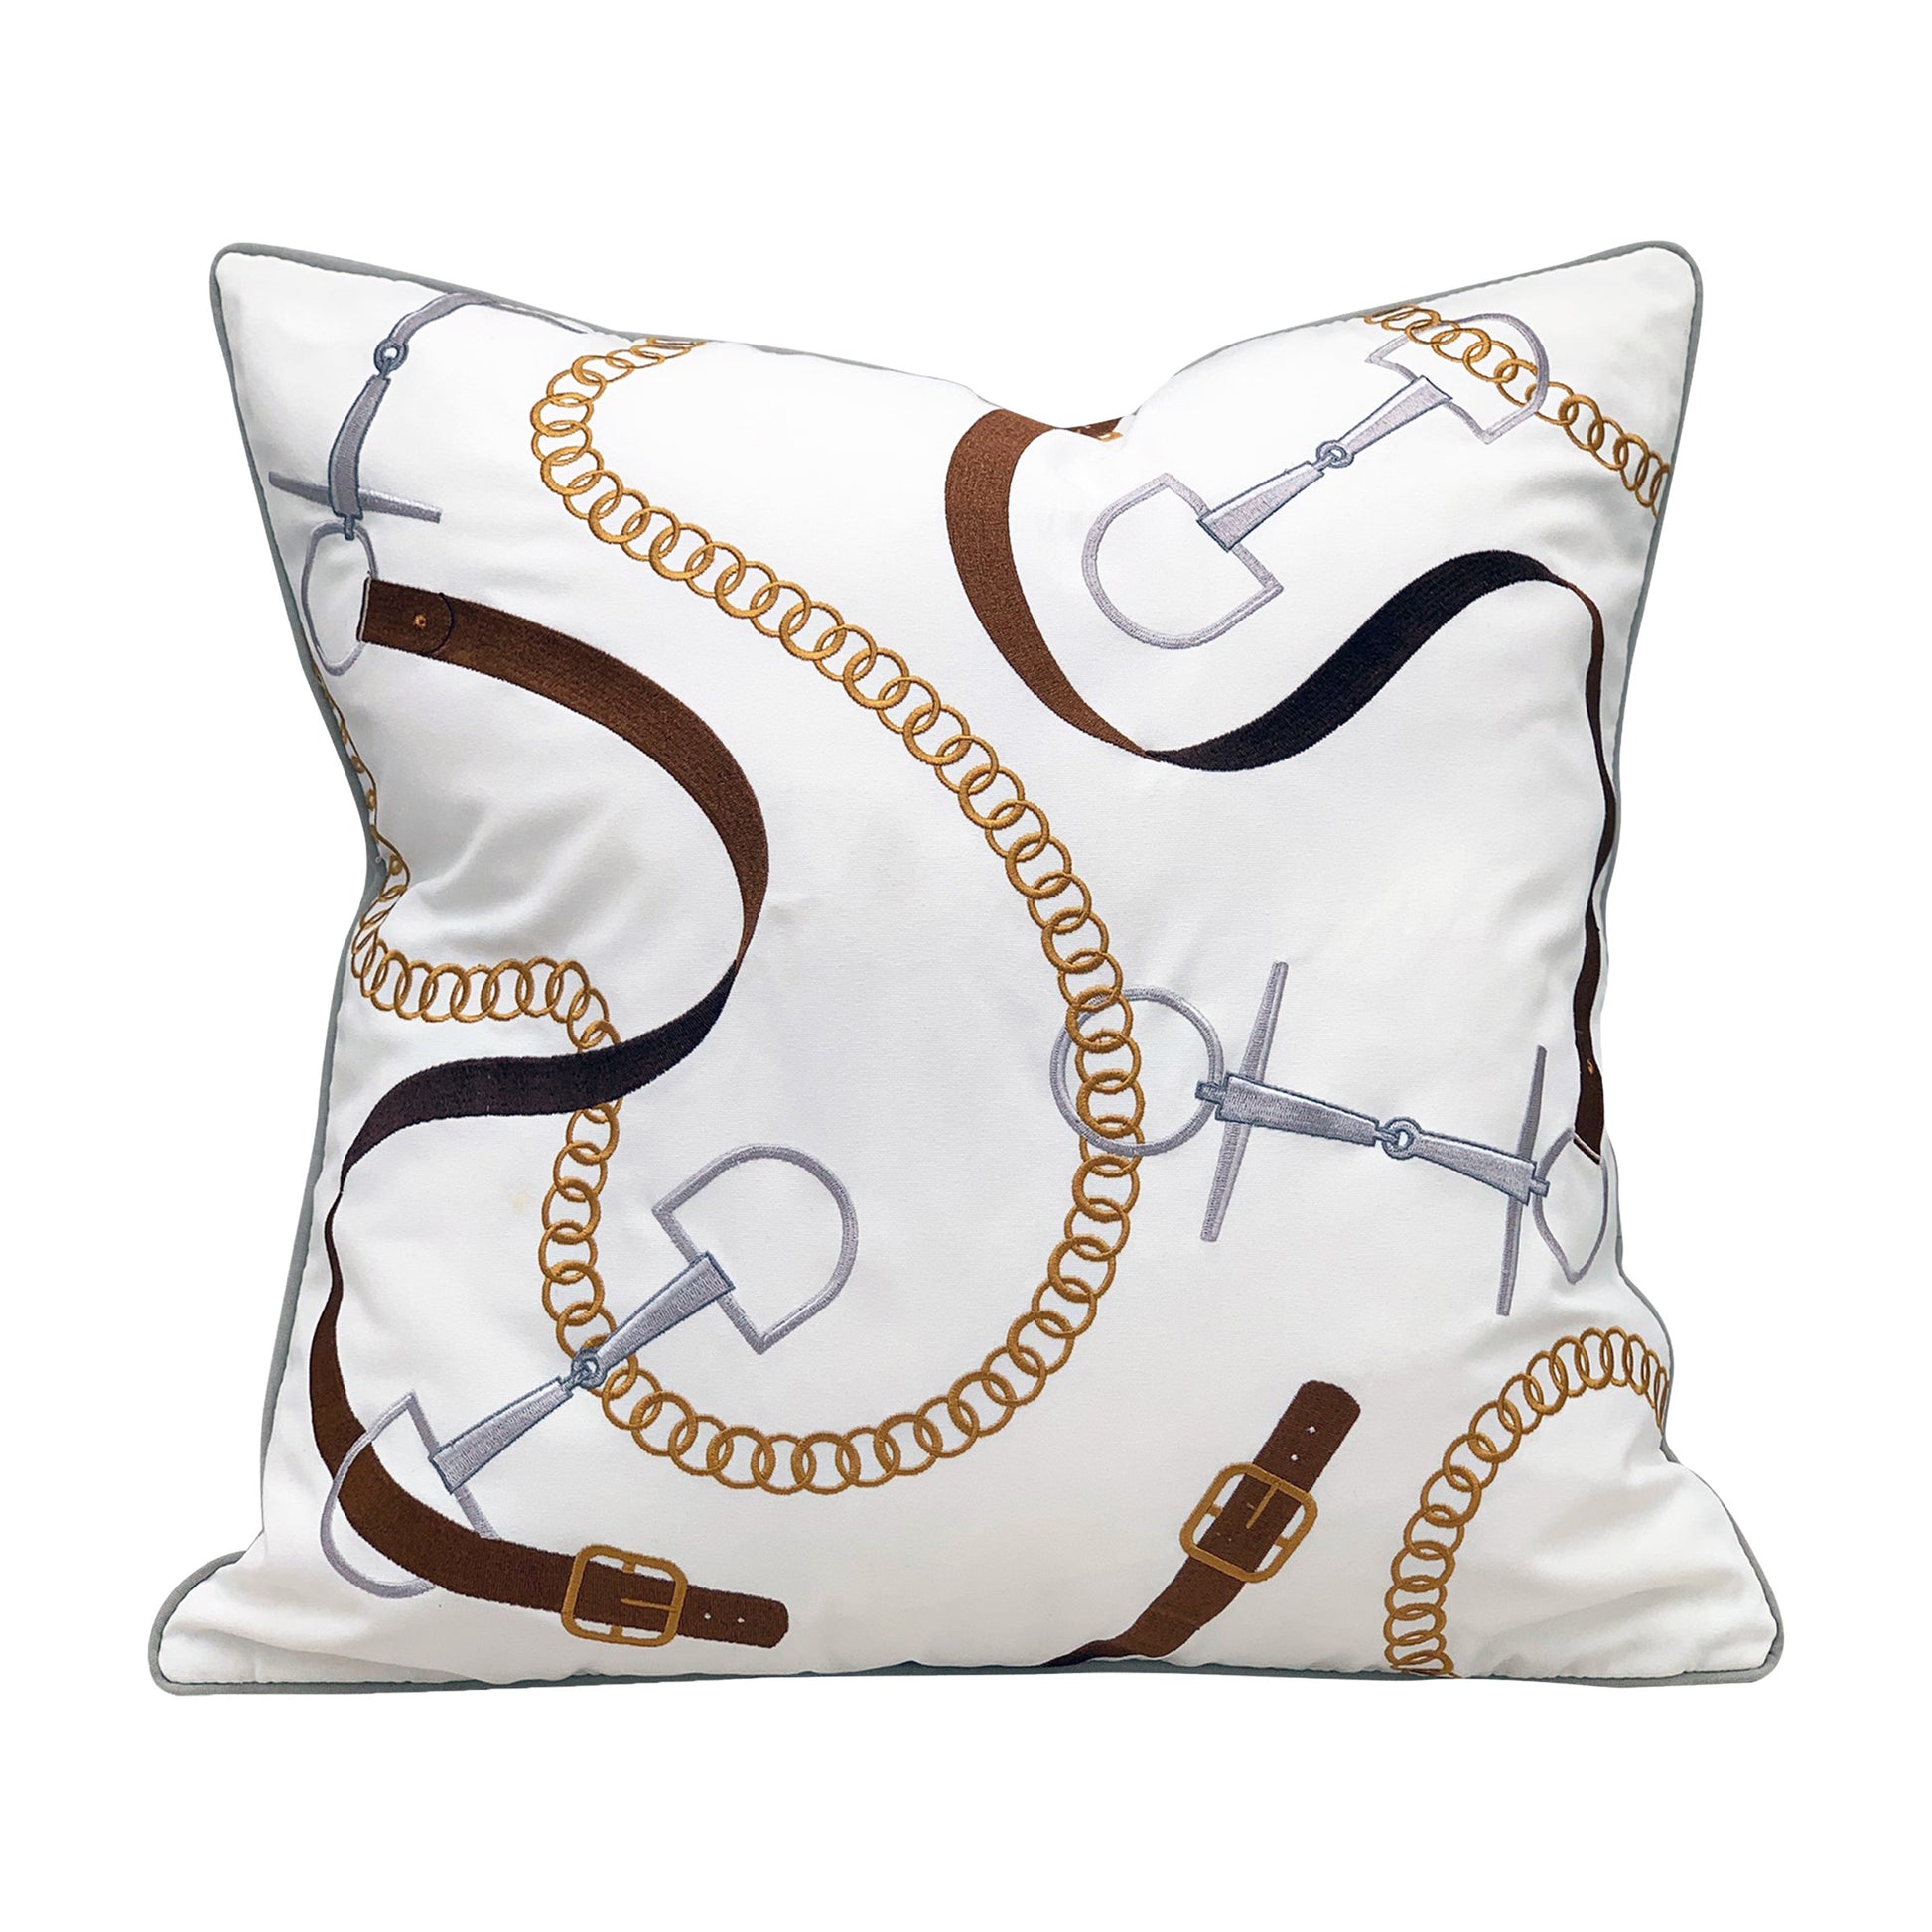 White ground pillow with embroidered equine bits & leather accessories.